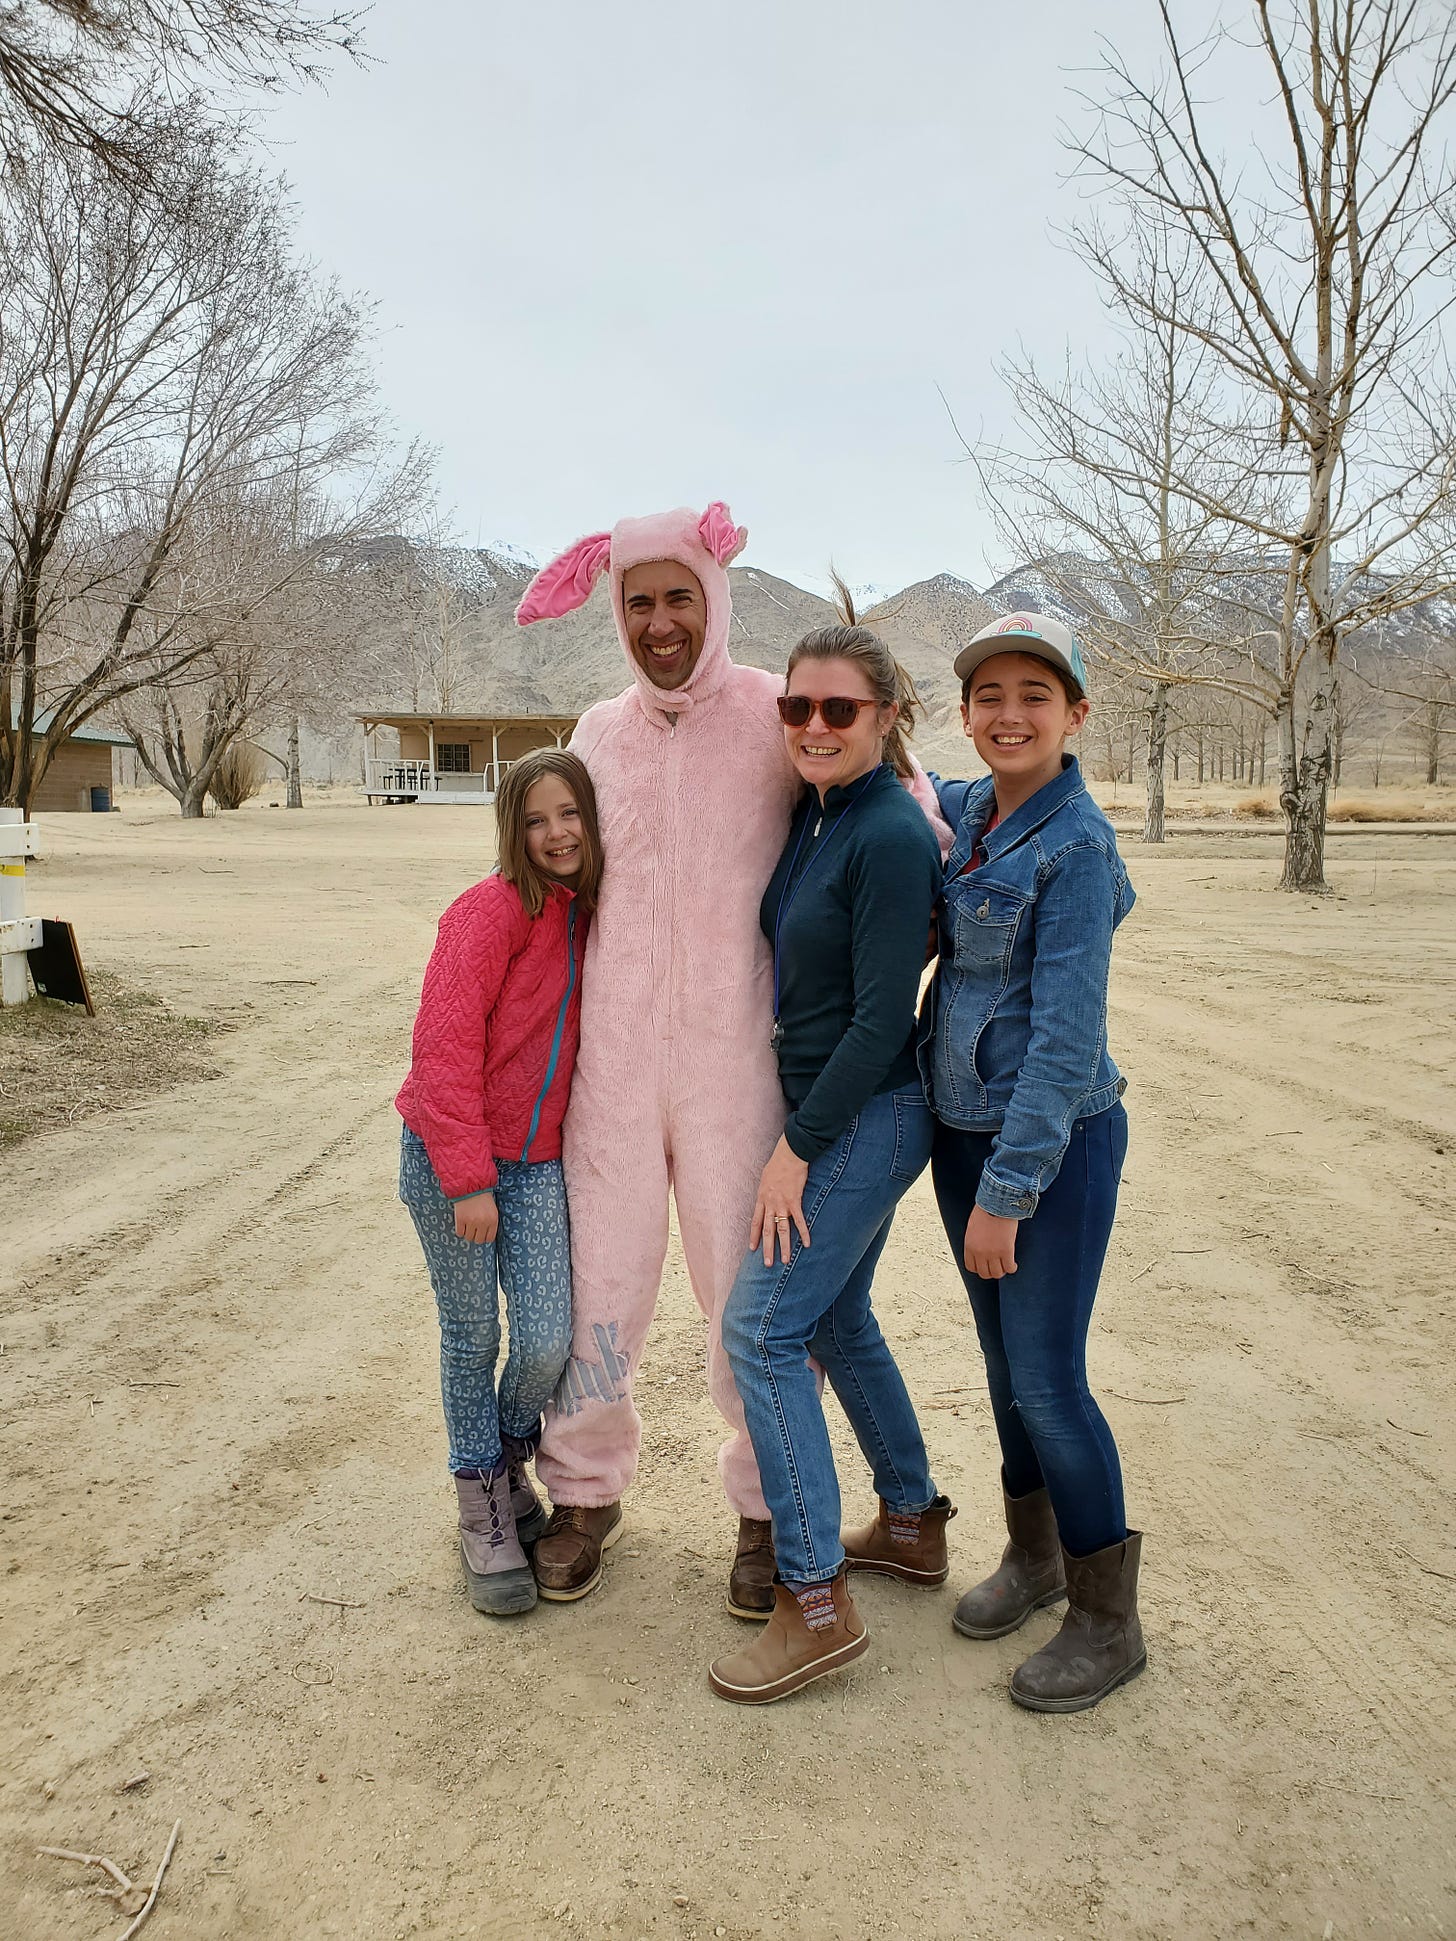 L, Eric, Charlotte, and Cora hugging and smiling at the camera. Eric is in a pink bunny suit.